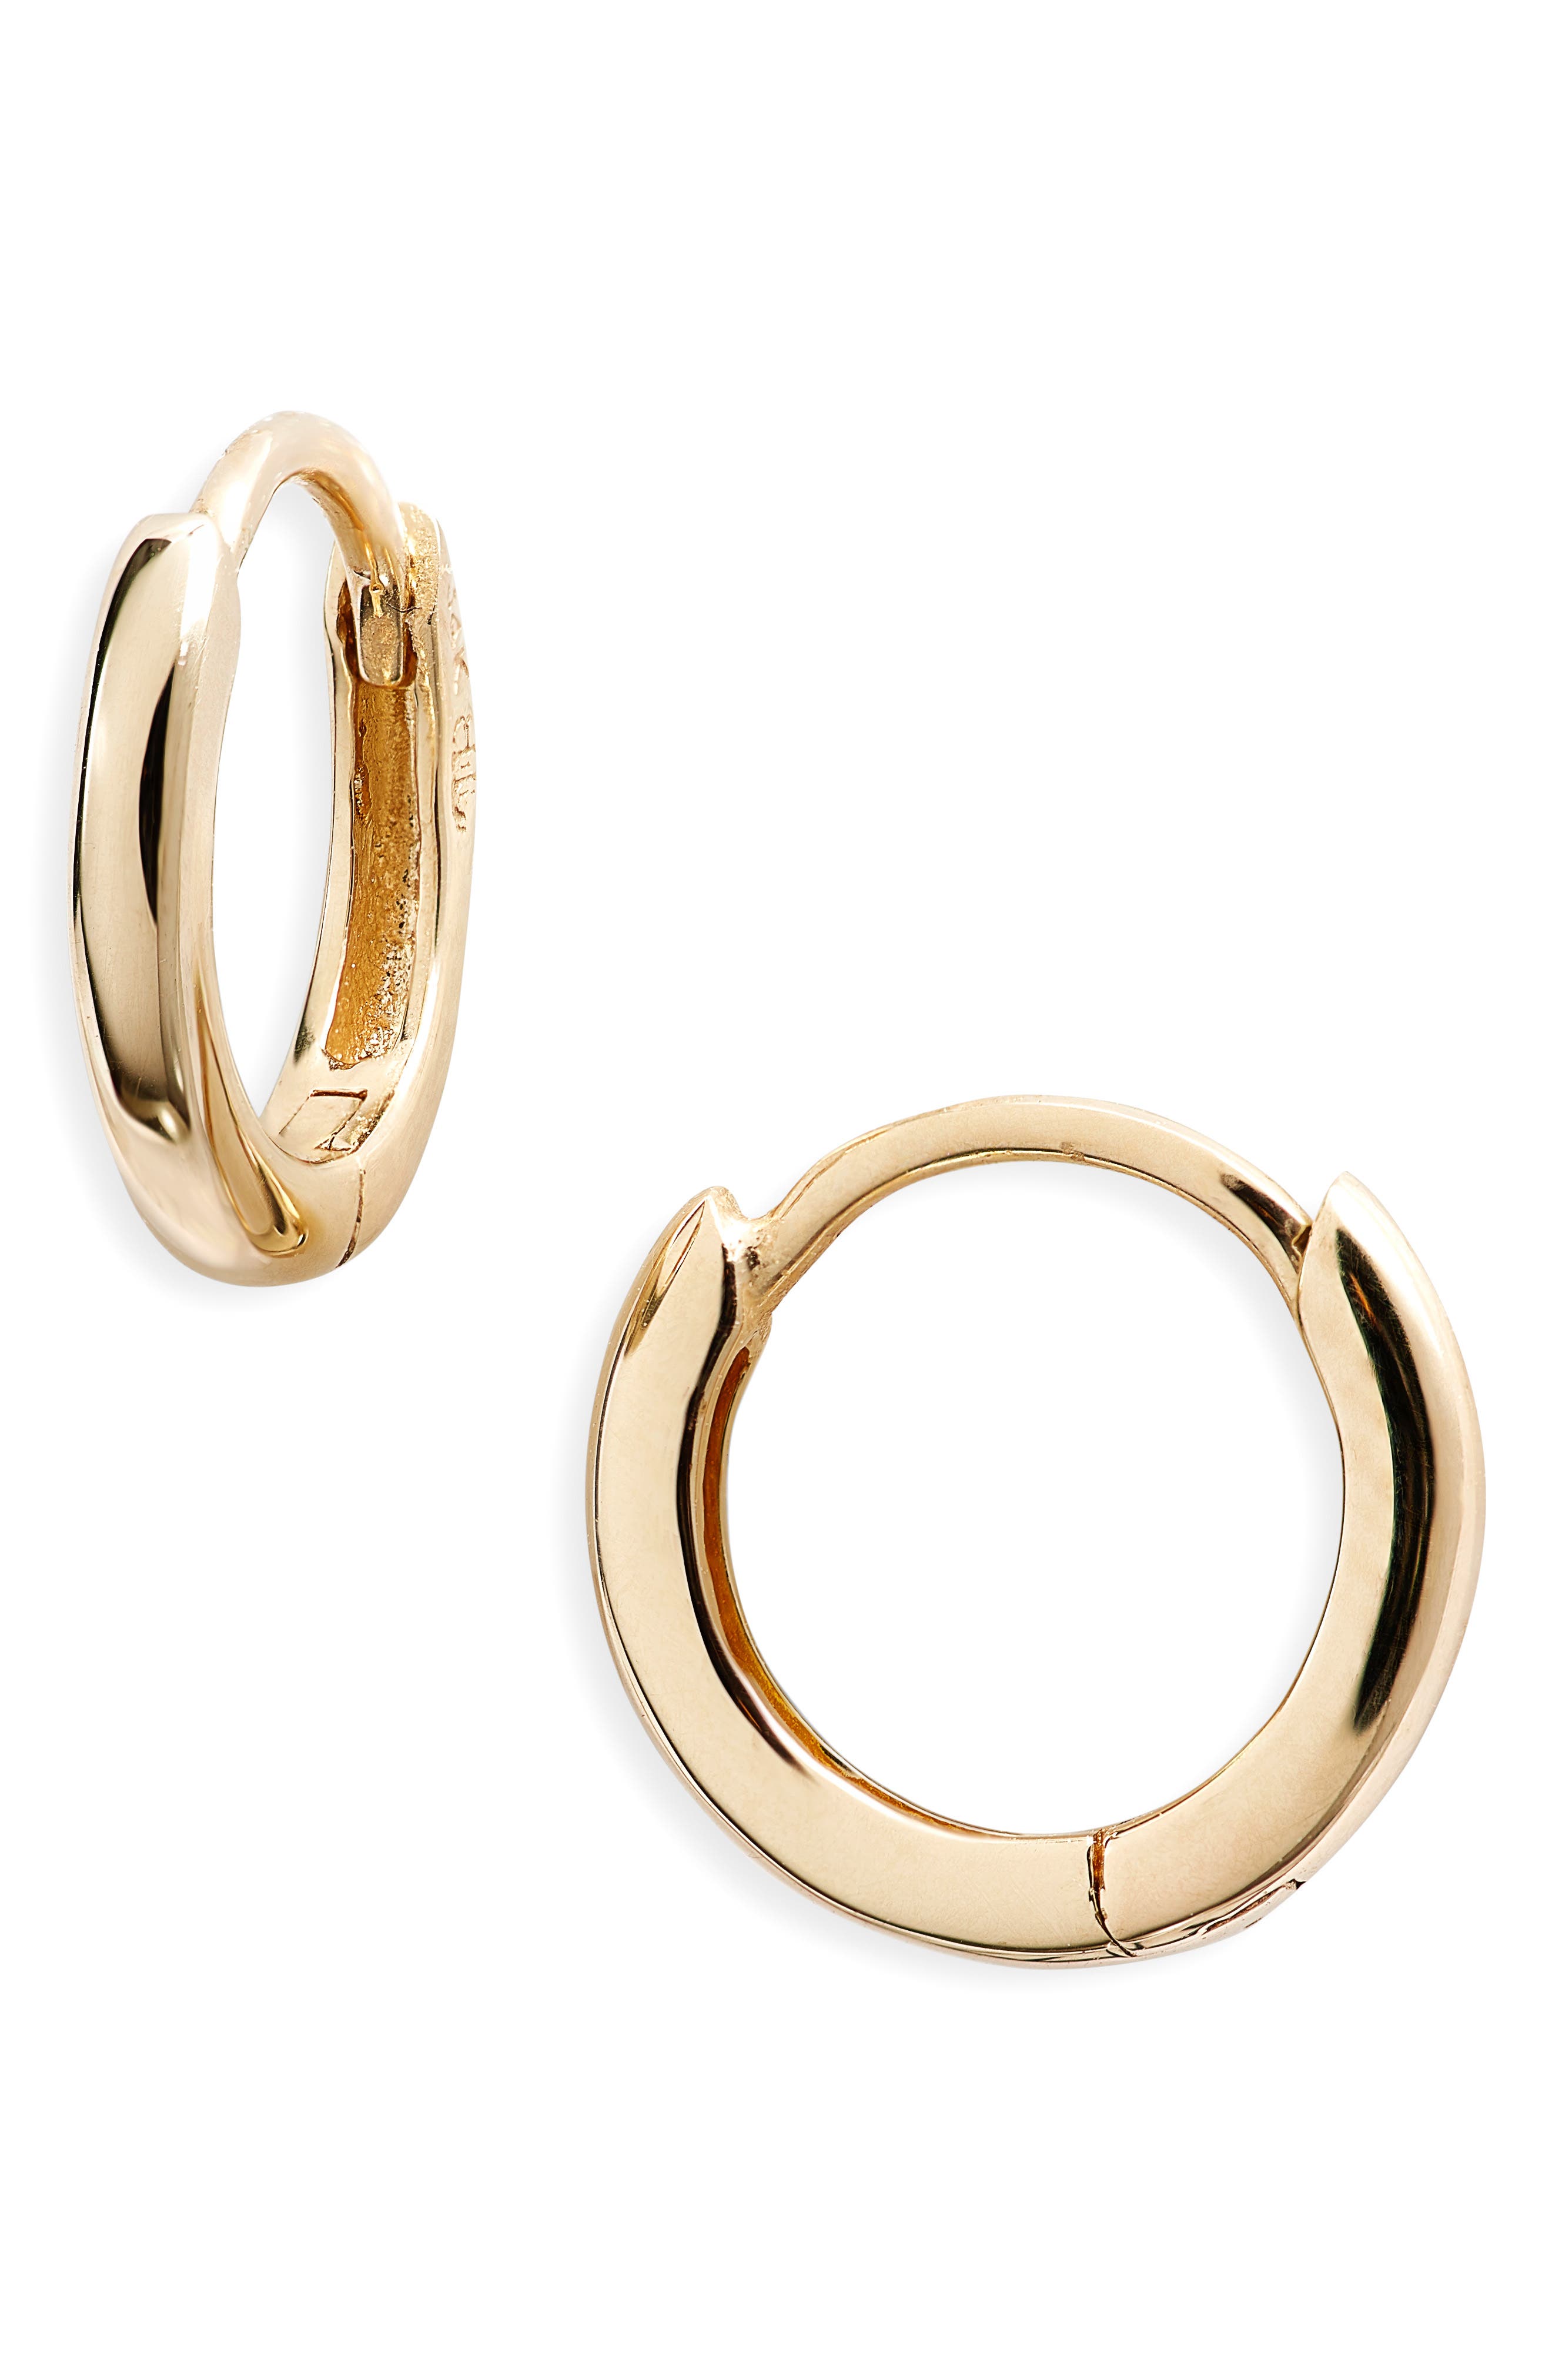 T&T 14K Gold GP Stainless Steel Thick Hoop Earrings With CZ EG34 